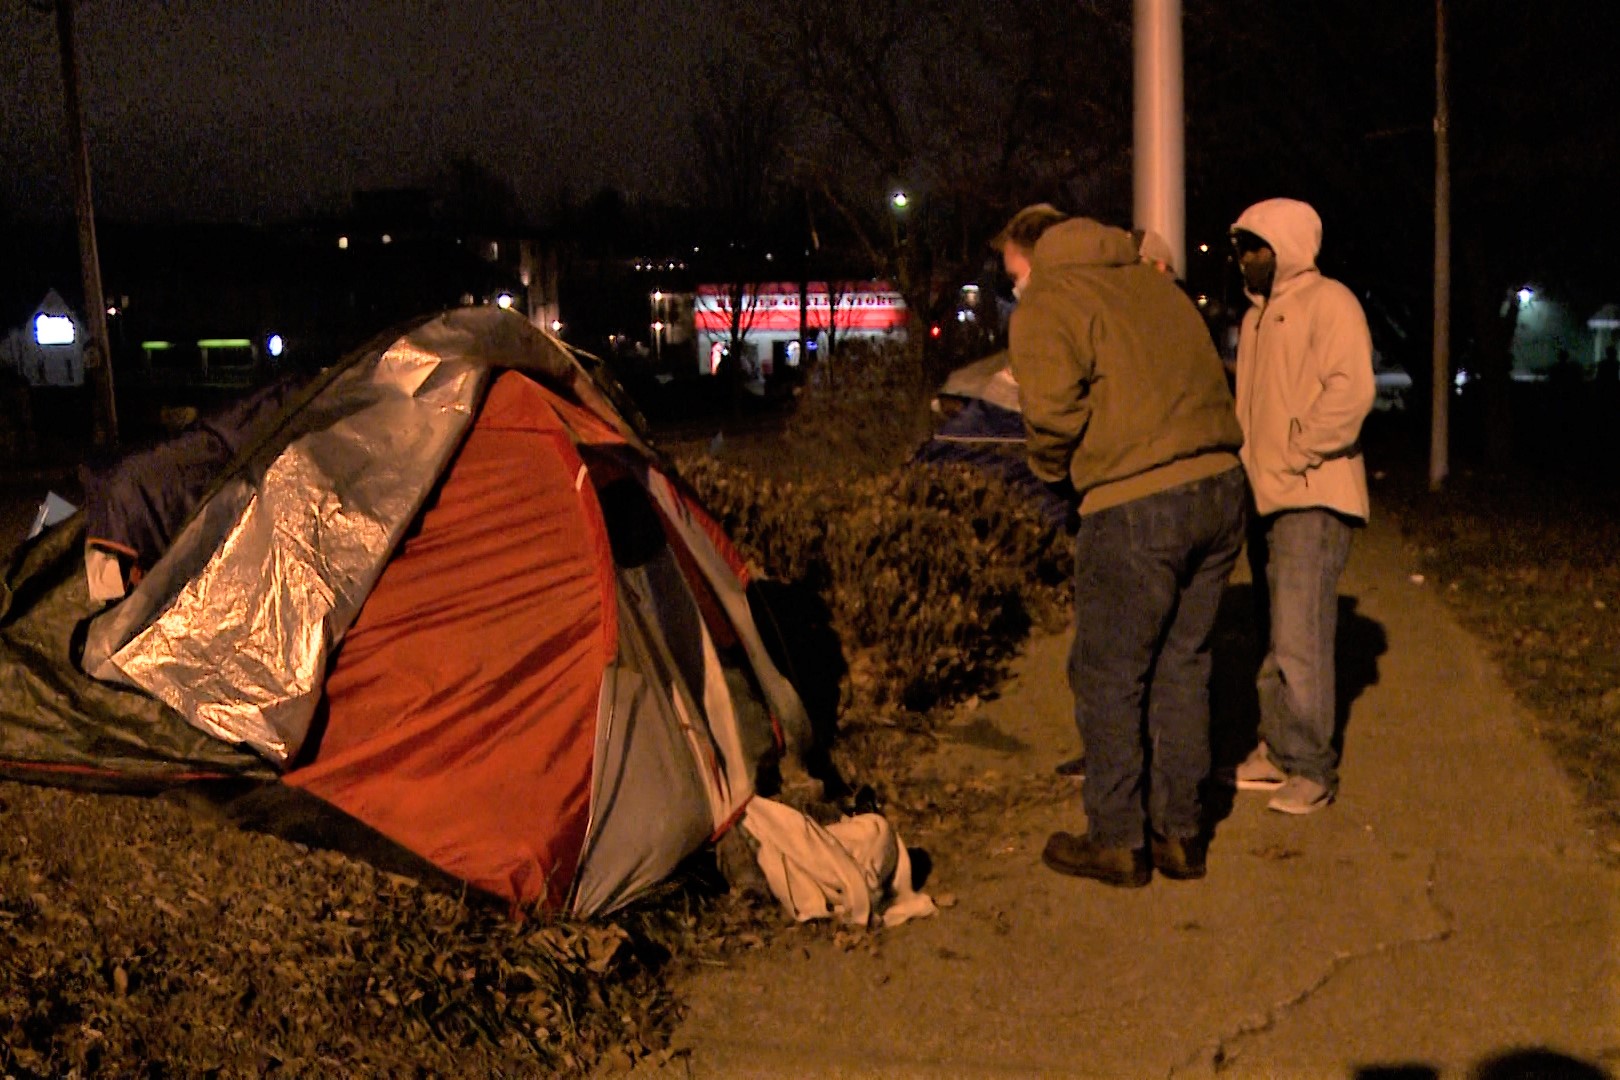 Local shelter head offers help to people sleeping in Seminary Park.